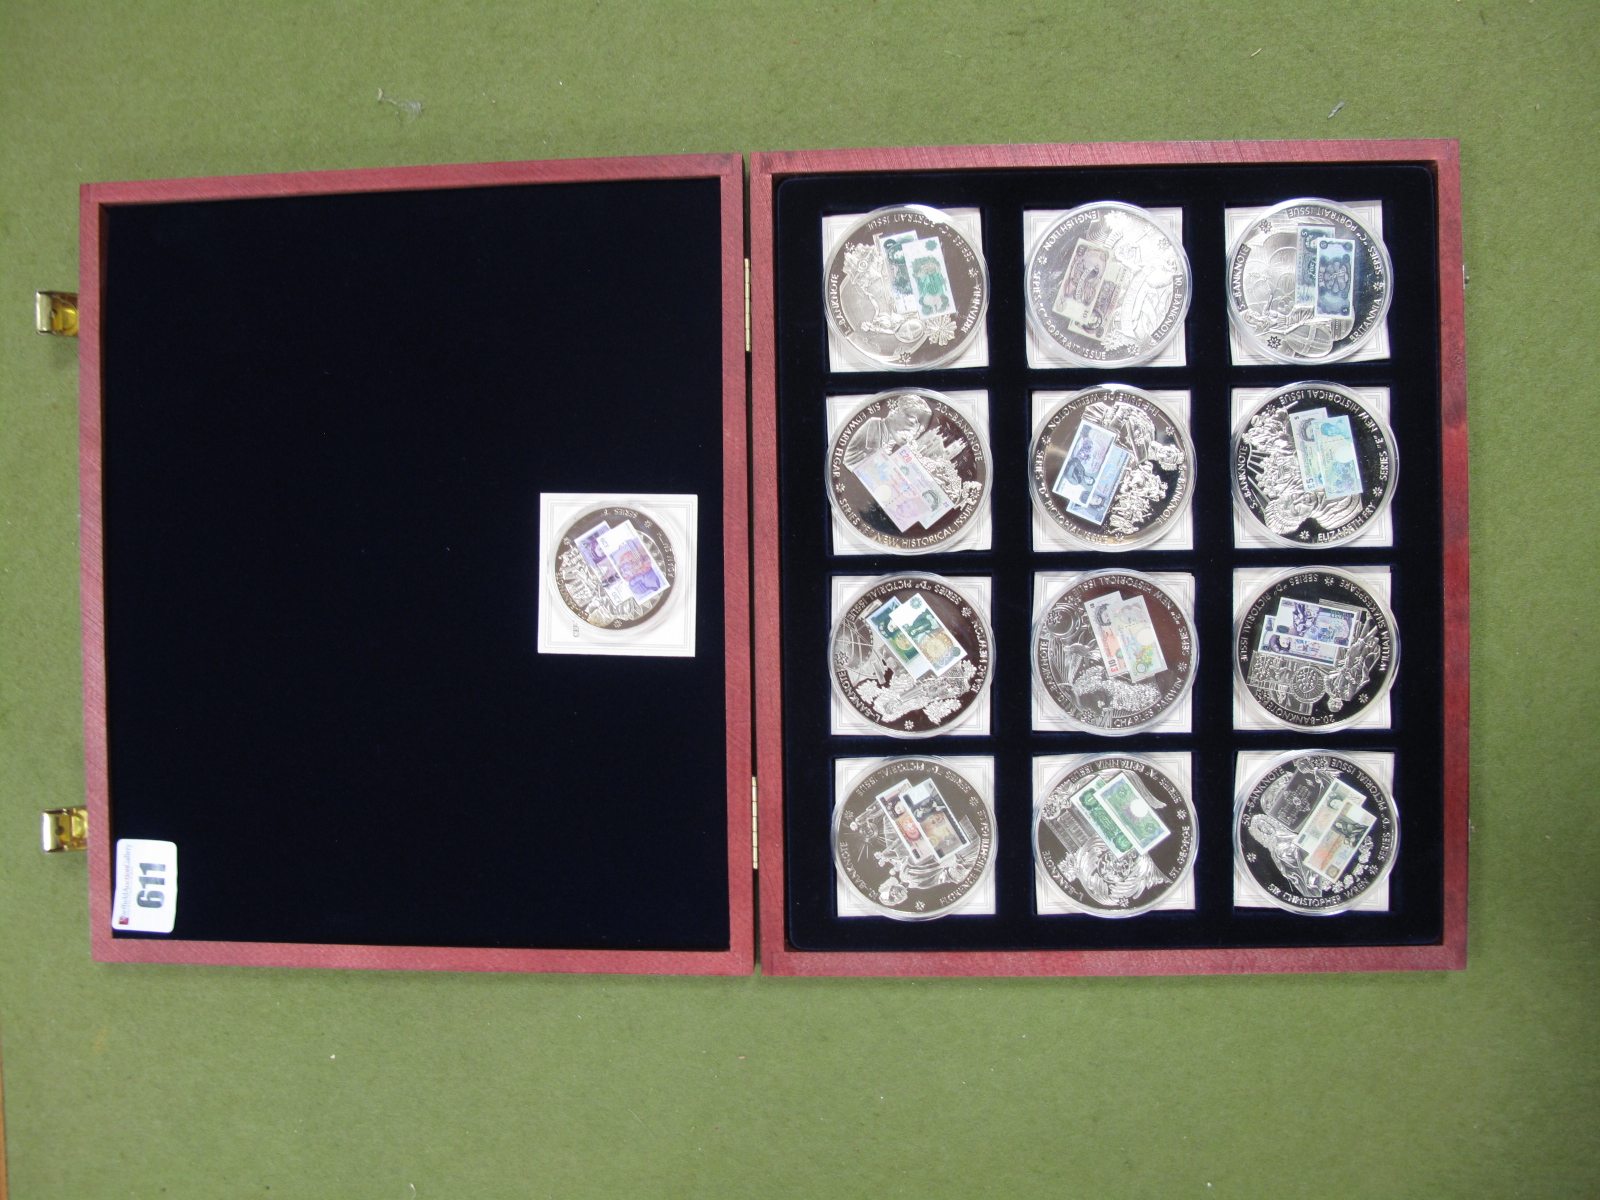 Thirteen Commemorative Coins by Windsor Mint, commemorating The British Banknote, with